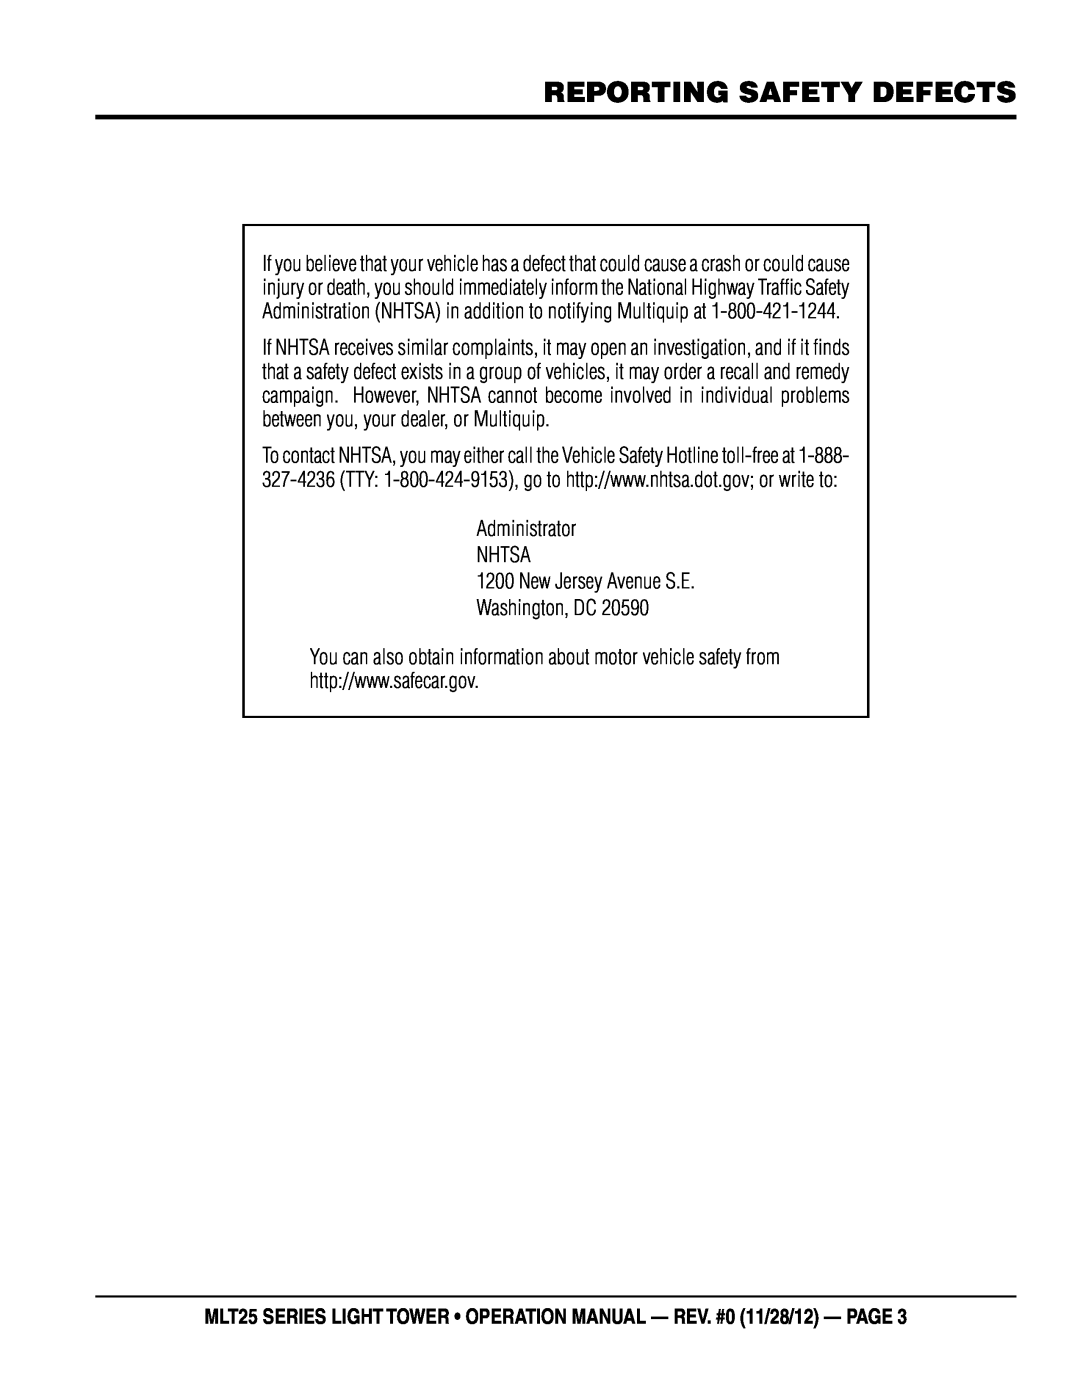 Multiquip Reporting Safety Defects, MLT25 SERIES LIGHT TOWER operation manual - rev. #0 11/28/12 - page 